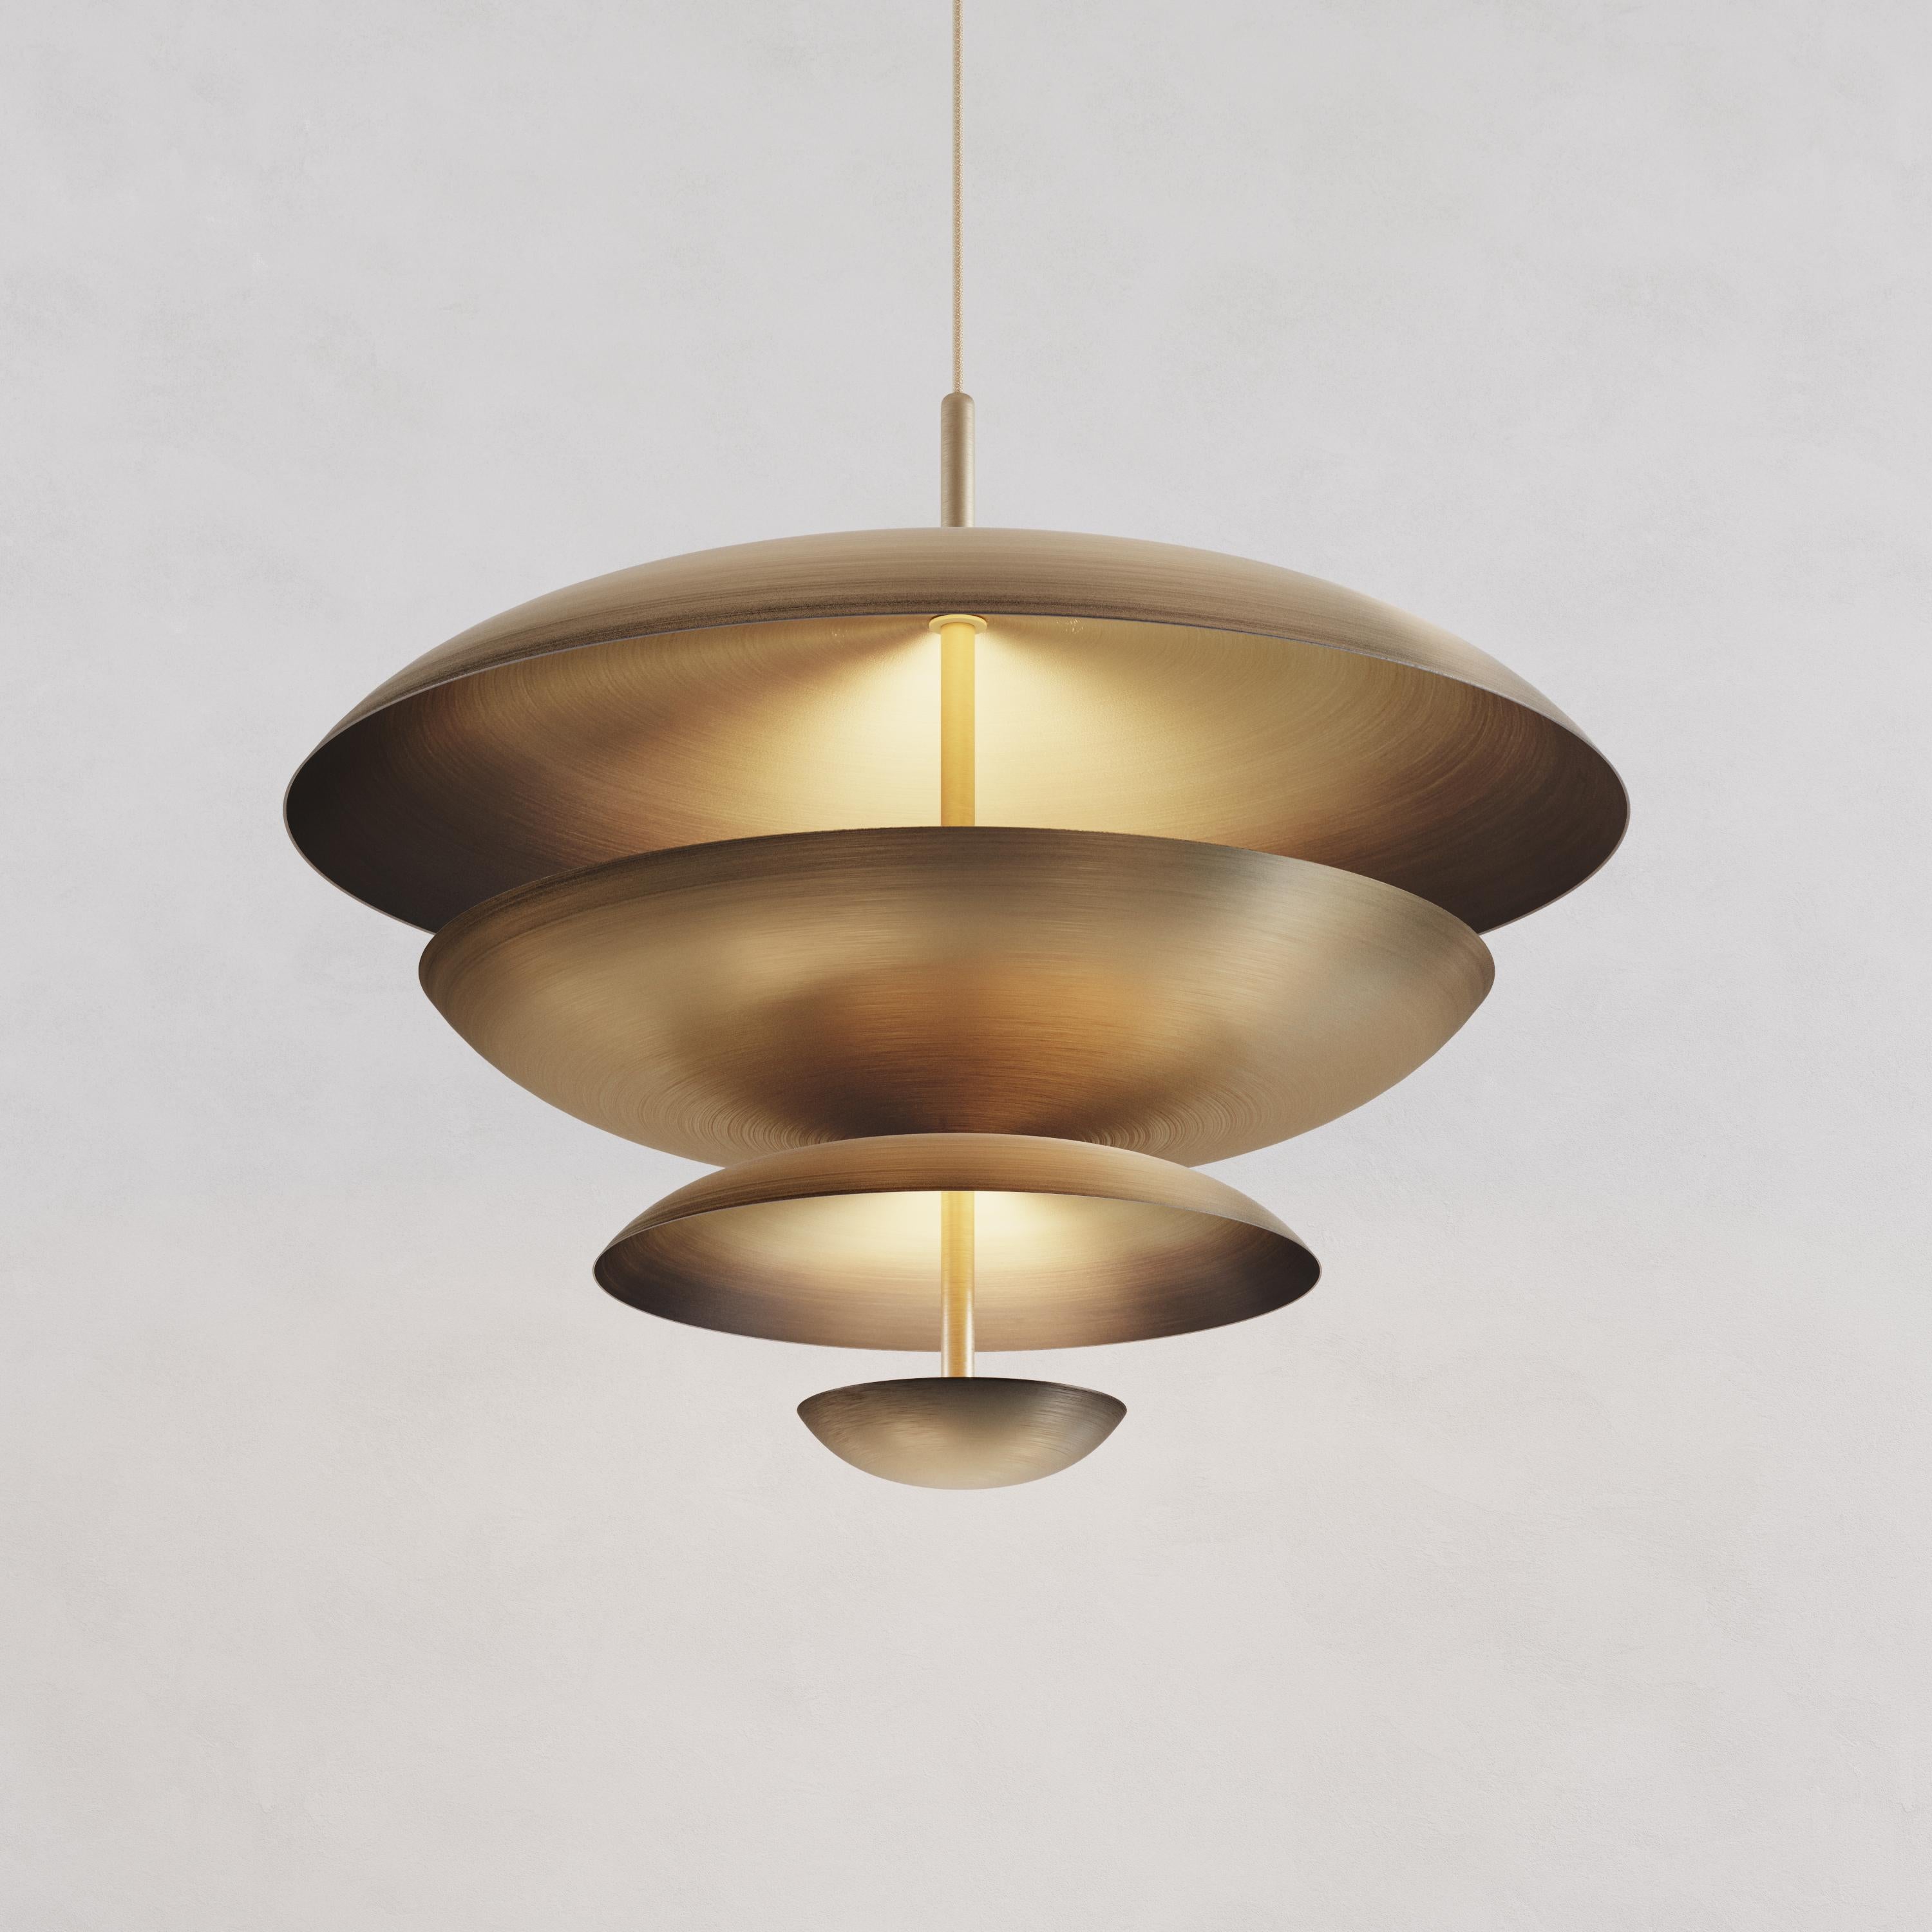 Finely hand-spun brass plates make up this pendant light, finished with a gentle gradient patina. Both sides of the brass shades are bronzed and gently brushed to reveal bright brass. The light is projected into the shade and reflects out,